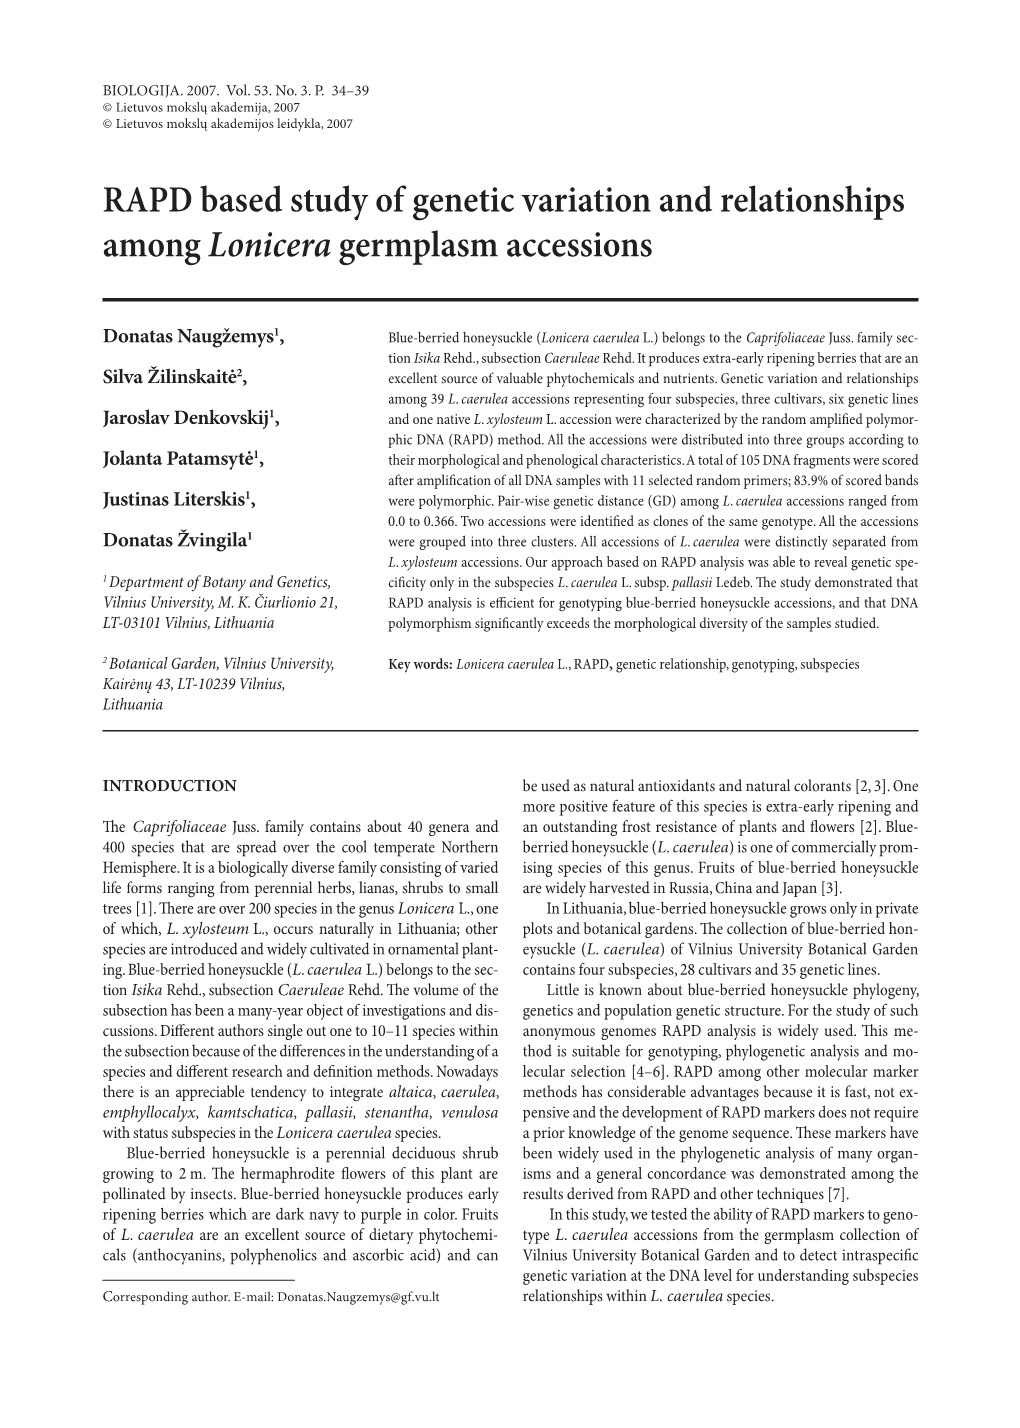 RAPD Based Study of Genetic Variation and Relationships Among Lonicera Germplasm Accessions